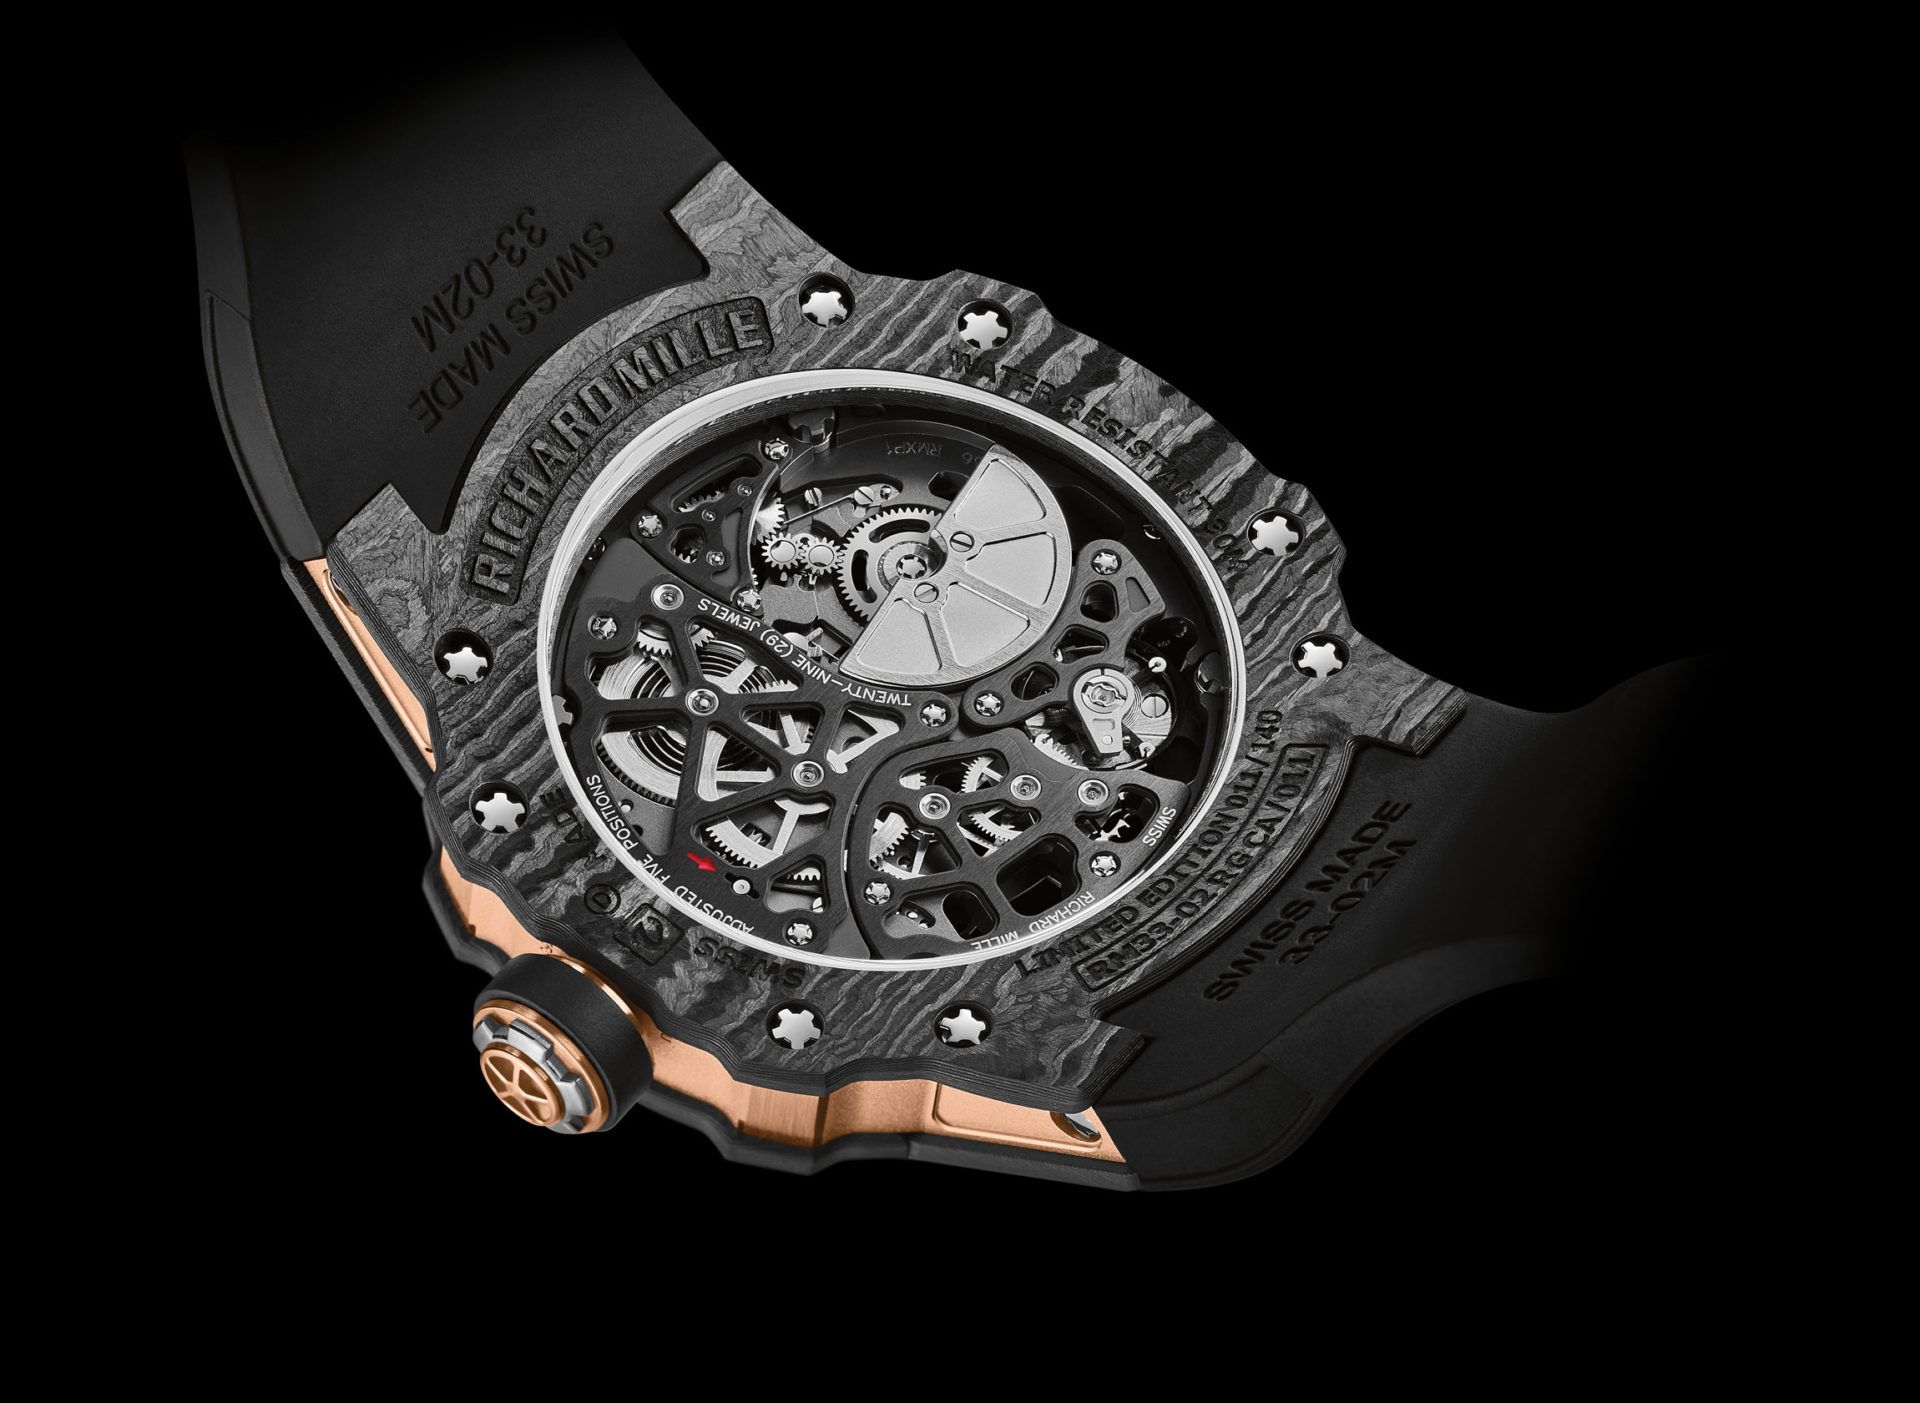 Richard Mille Rose Gold Automatic Flyback Chronograph Watch RM11-03